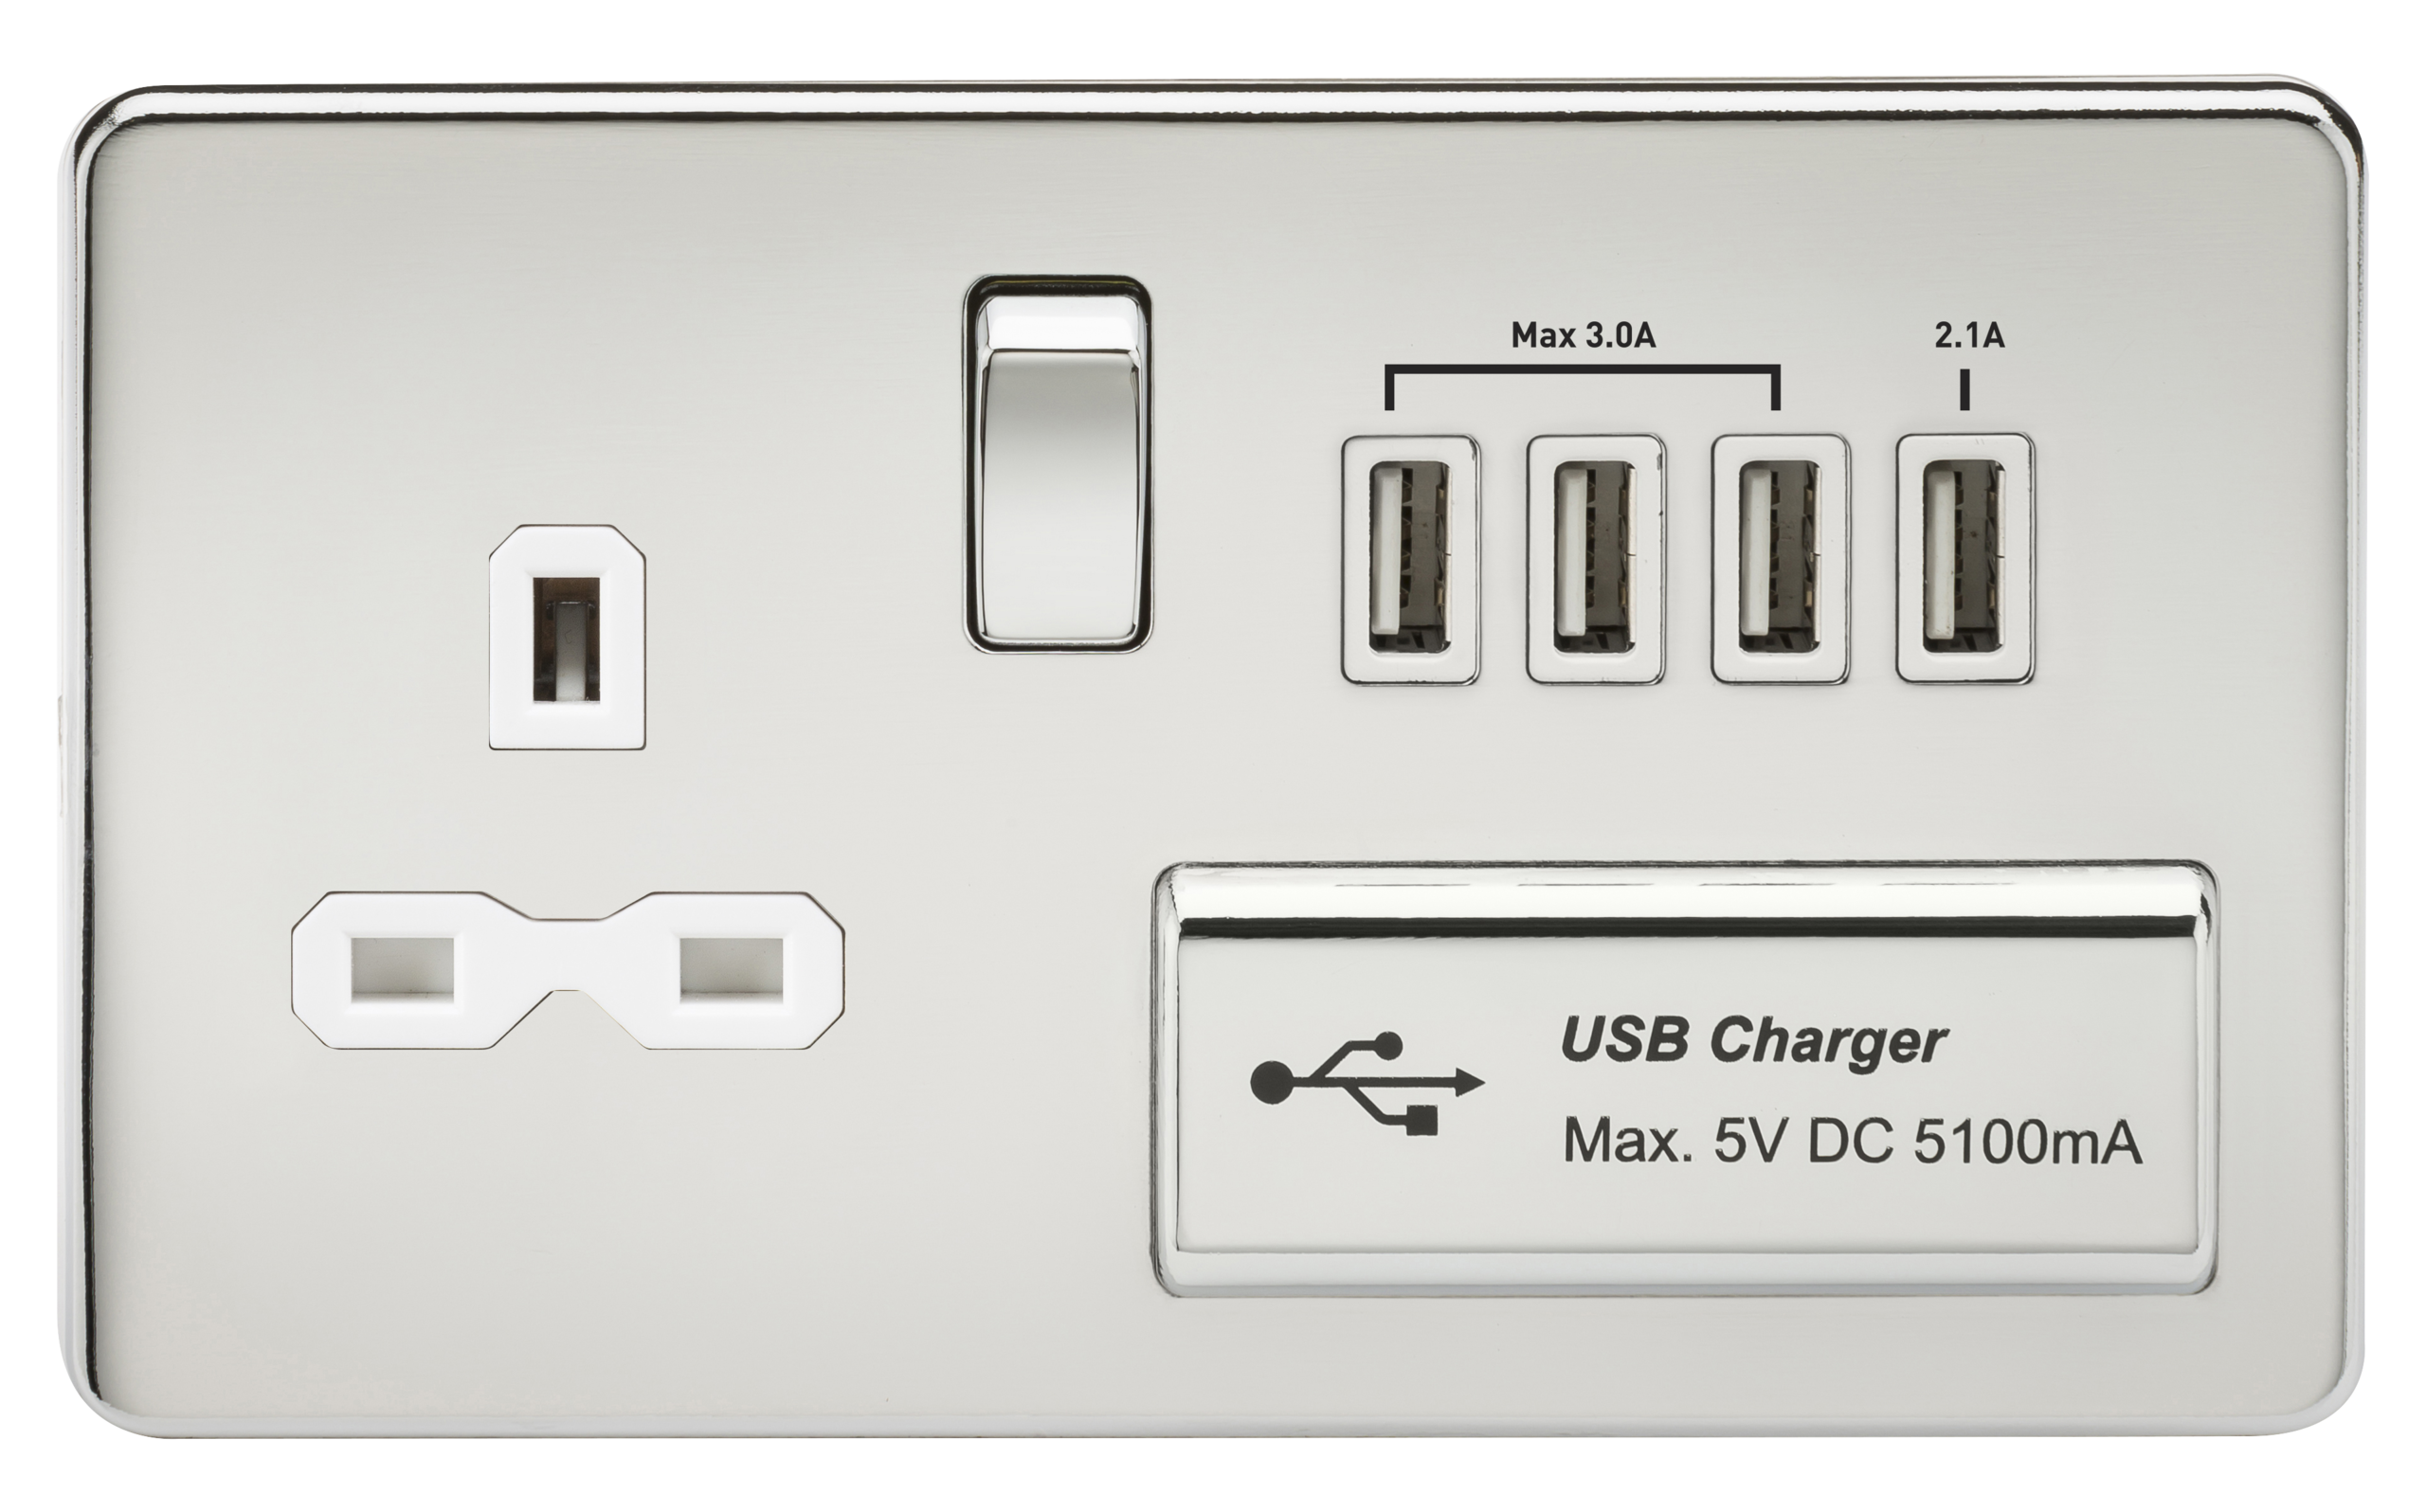 Screwless 13A Switched Socket With Quad USB Charger (5.1A) - Polished Chrome With White Insert - SFR7USB4PCW 